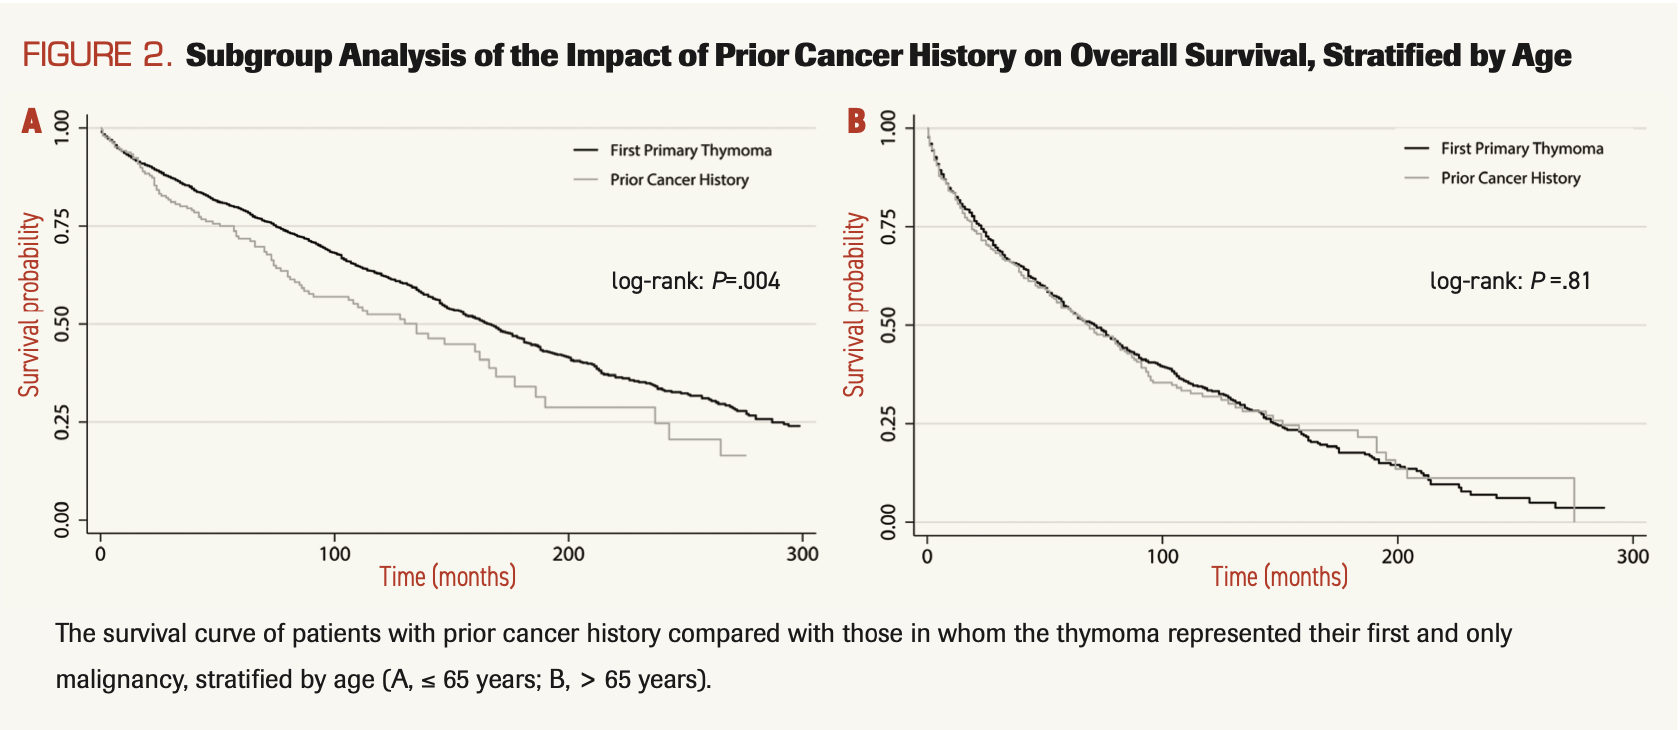 FIGURE 2. Subgroup Analysis of the Impact of Prior Cancer History on Overall Survival, Stratified by Age